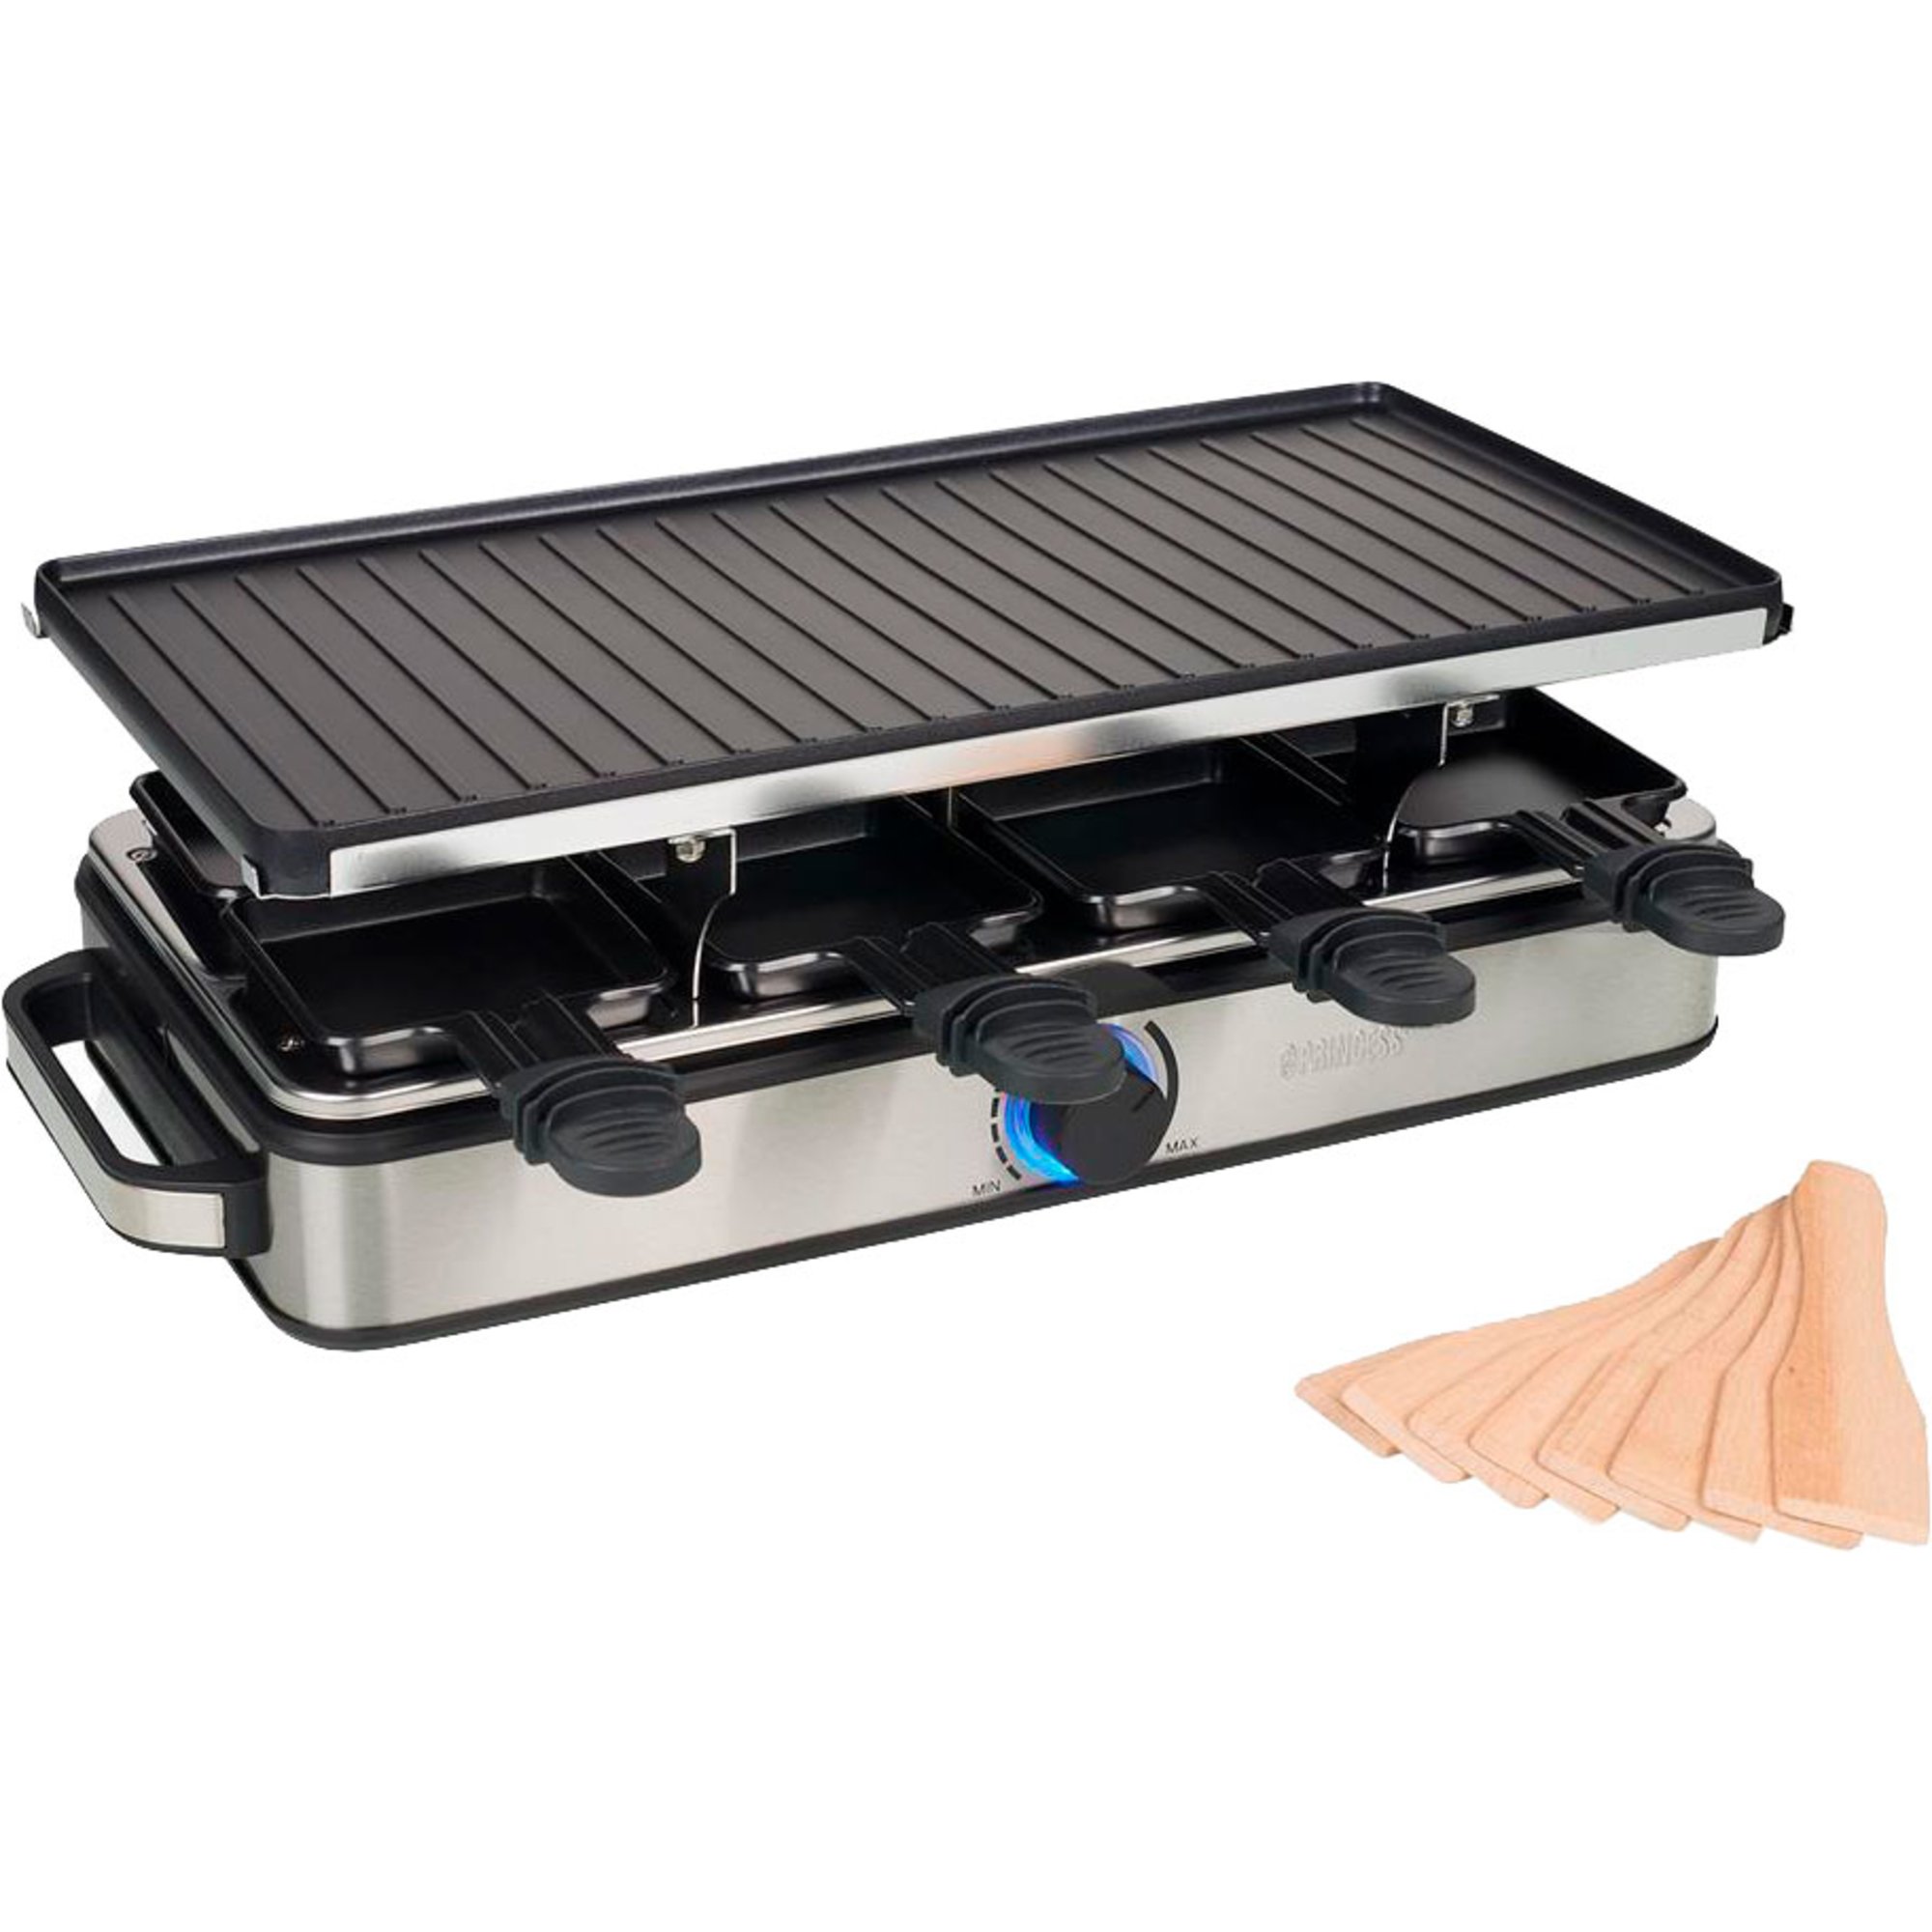 8: Princess Grill Deluxe Raclette, 8 personer